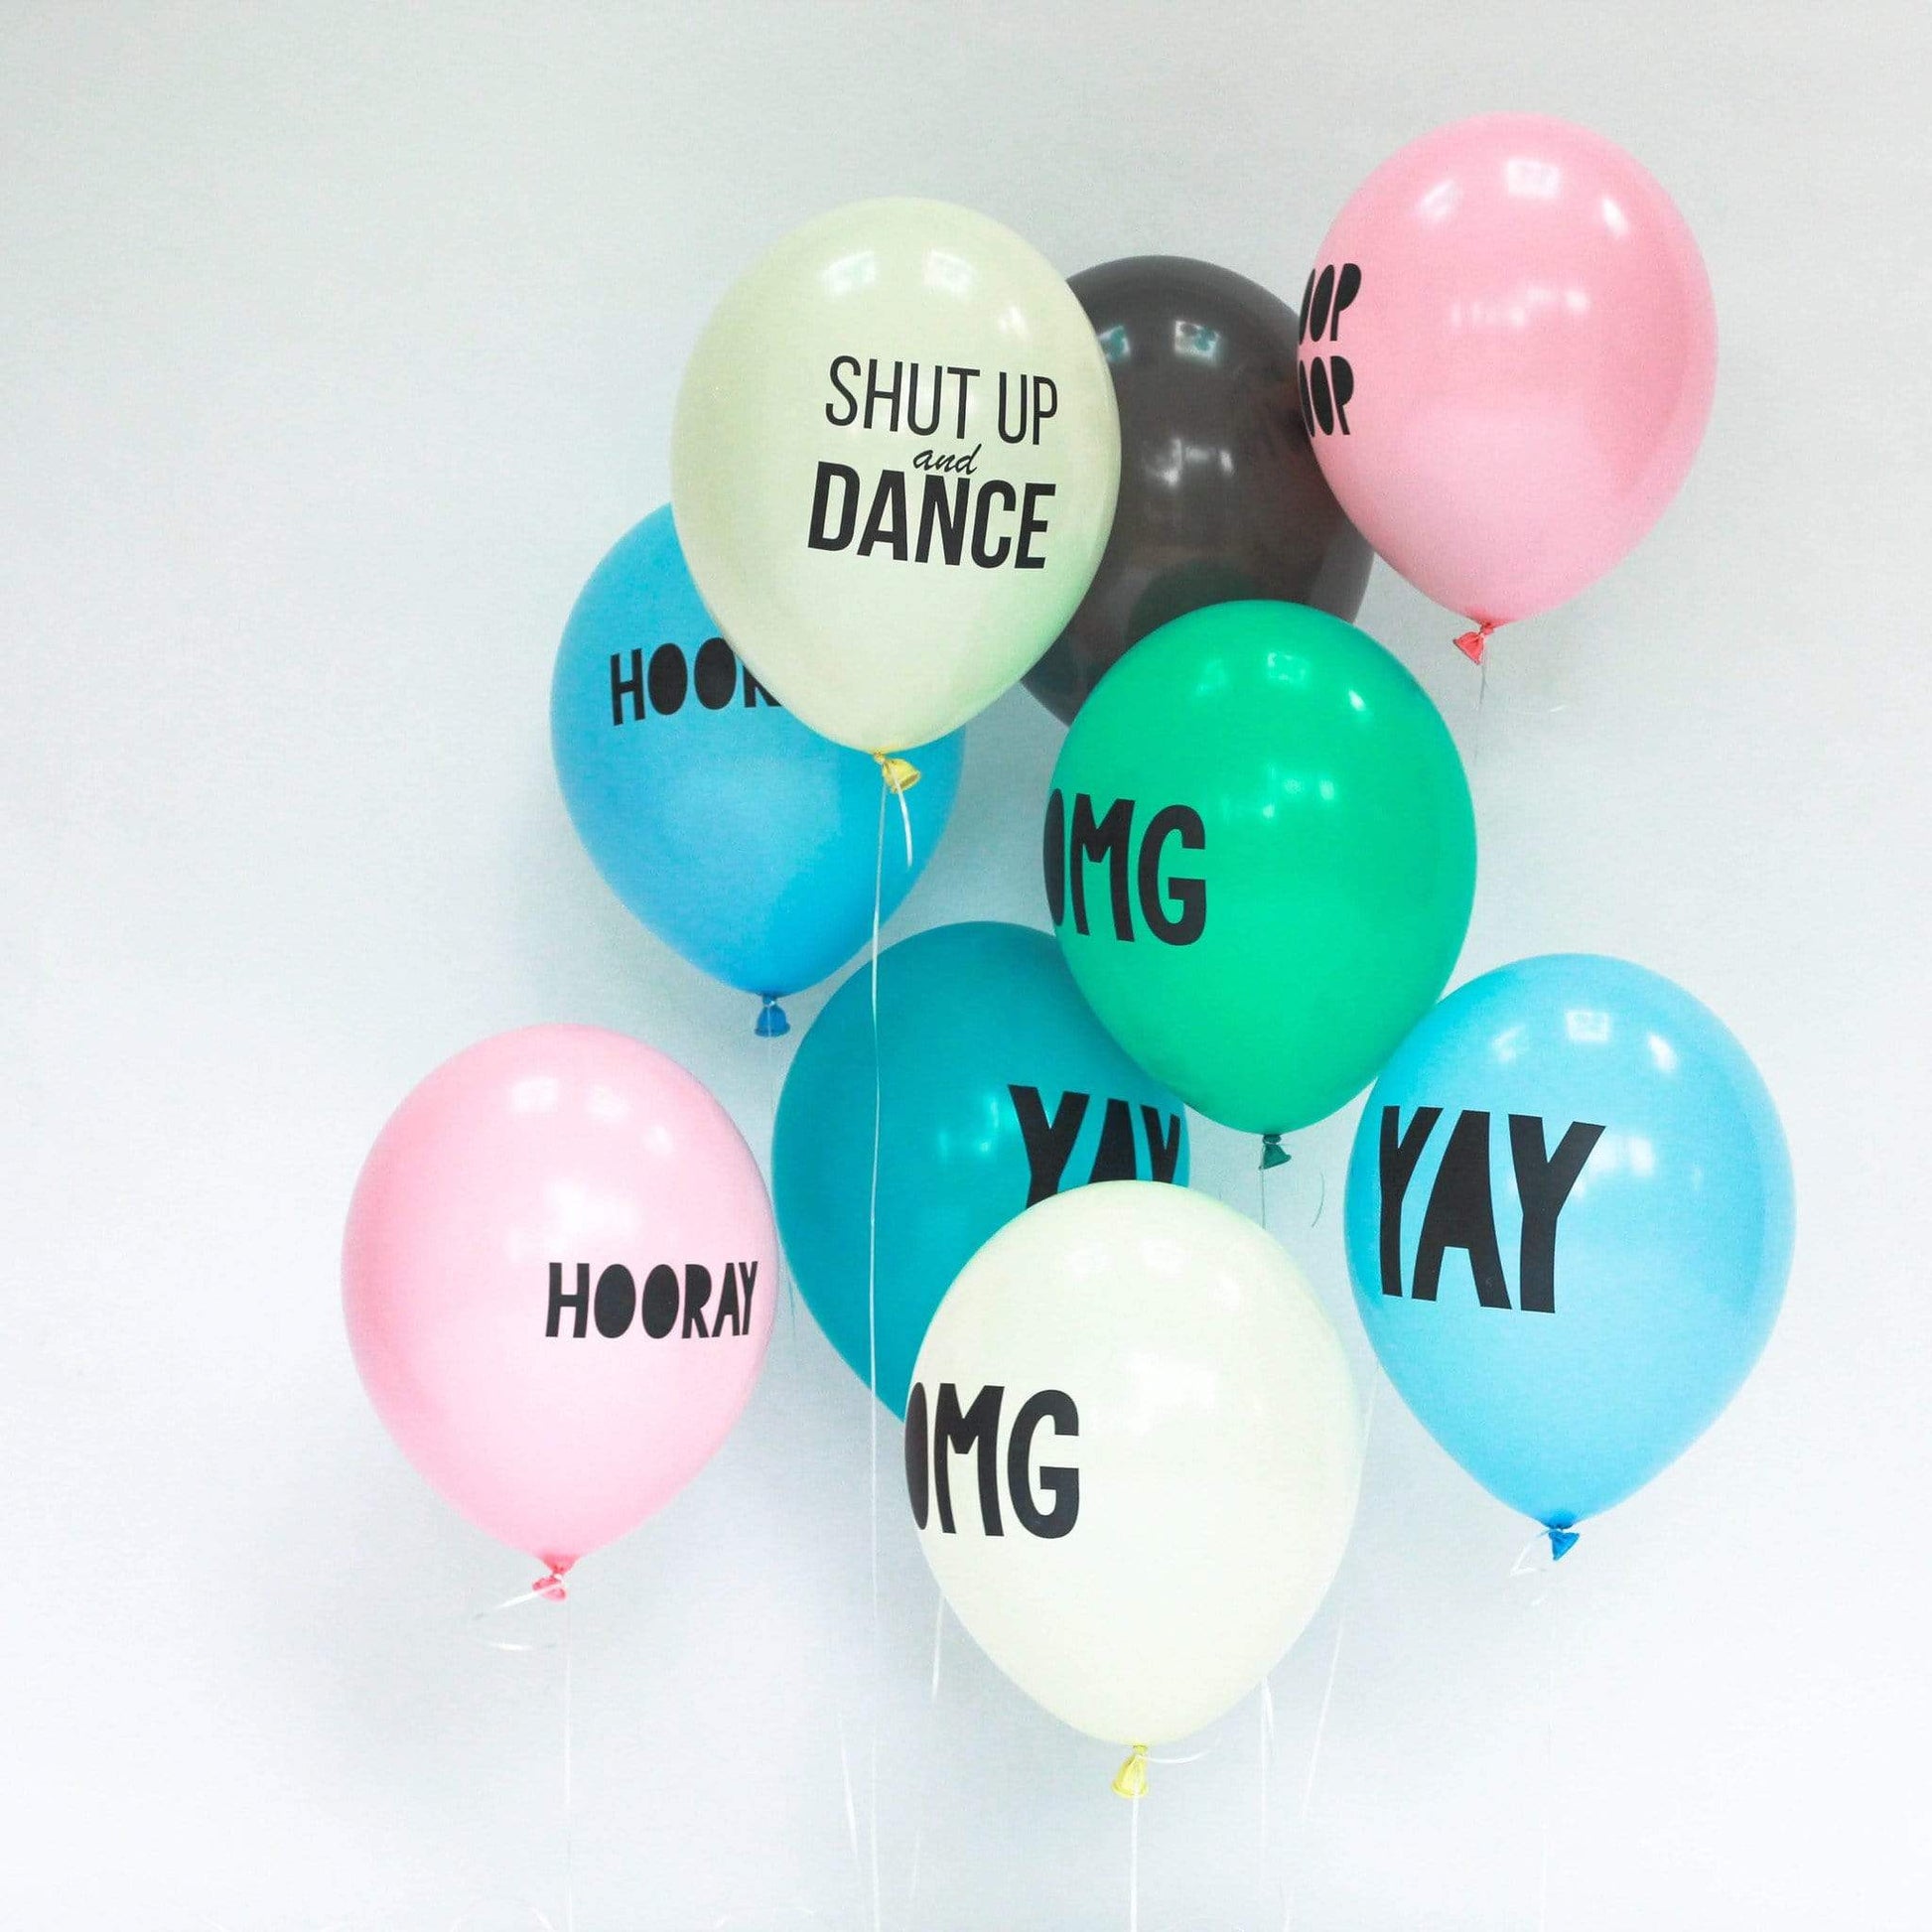 Whoop Whoop Balloons Cream - Pretty Little Party Shop UK Pretty Little Party Shop